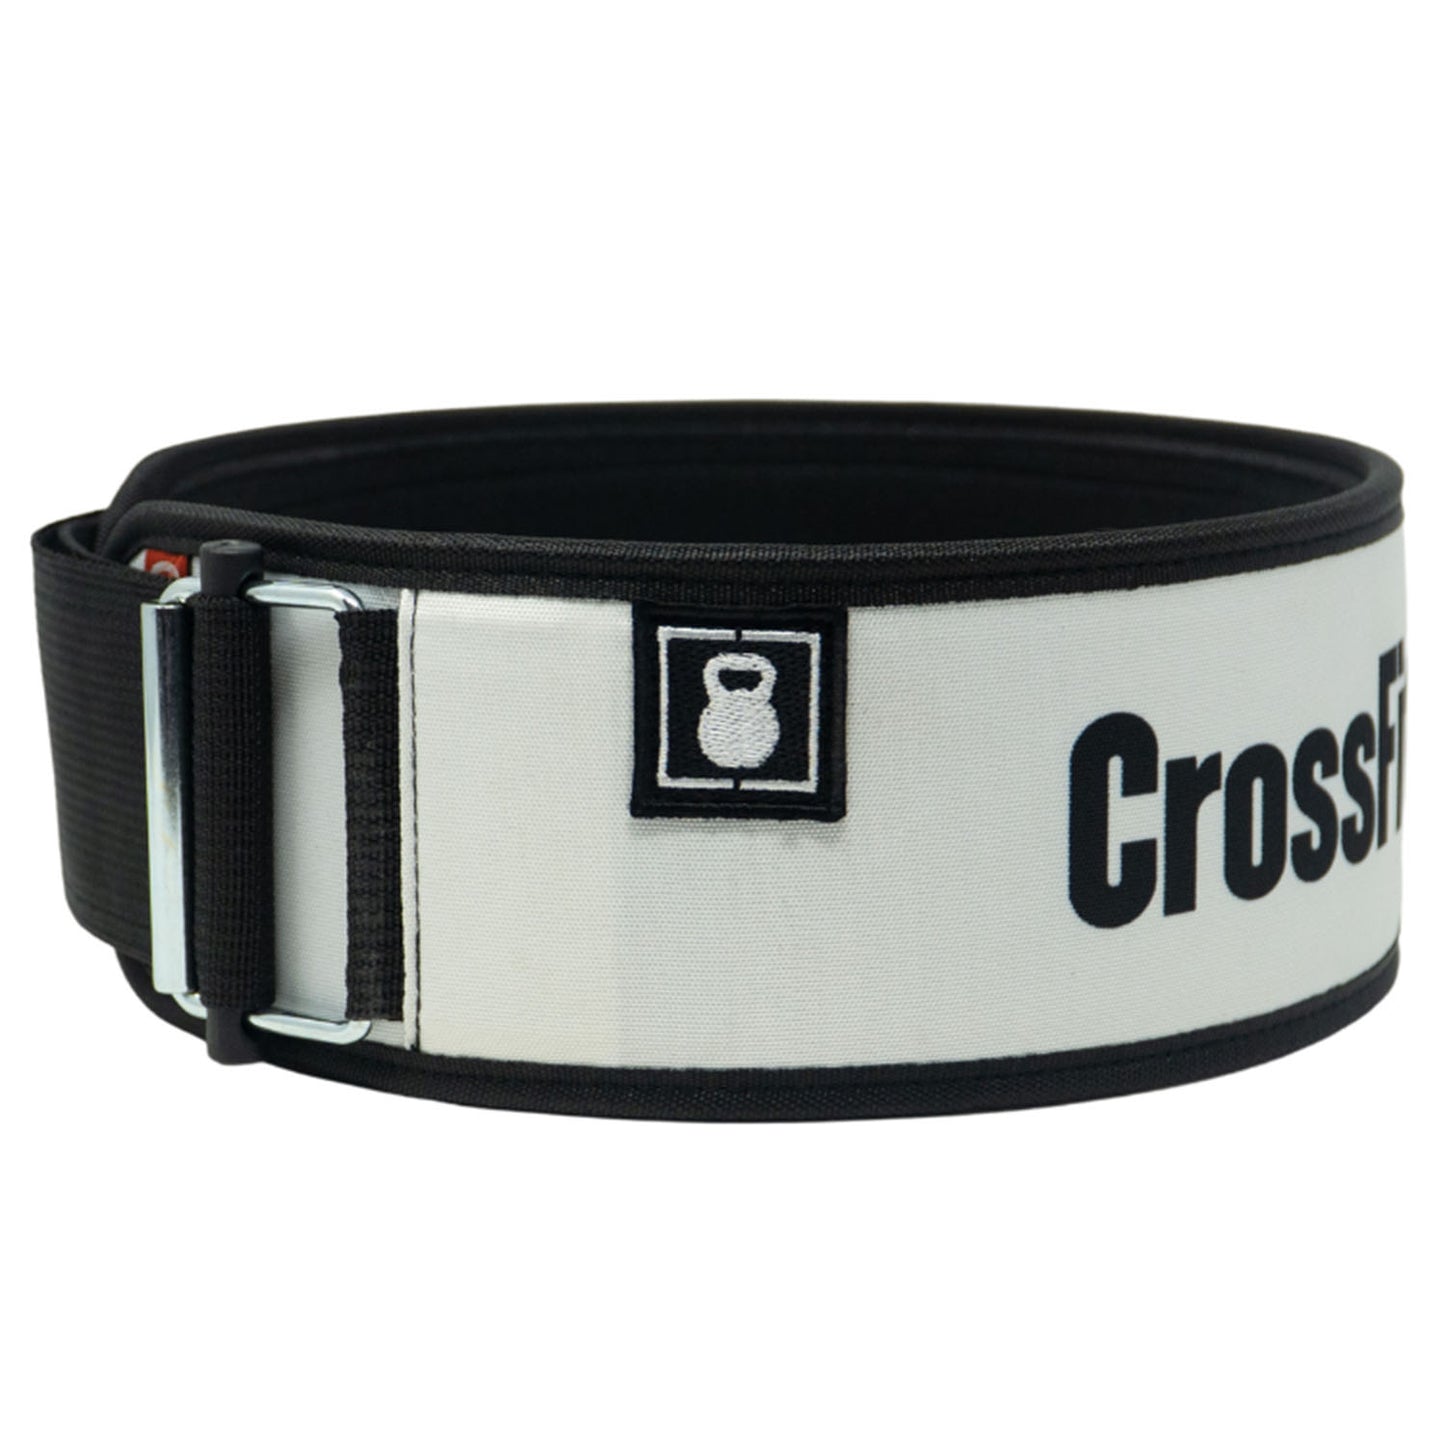 CrossFit White Weightlifting Belt - side view